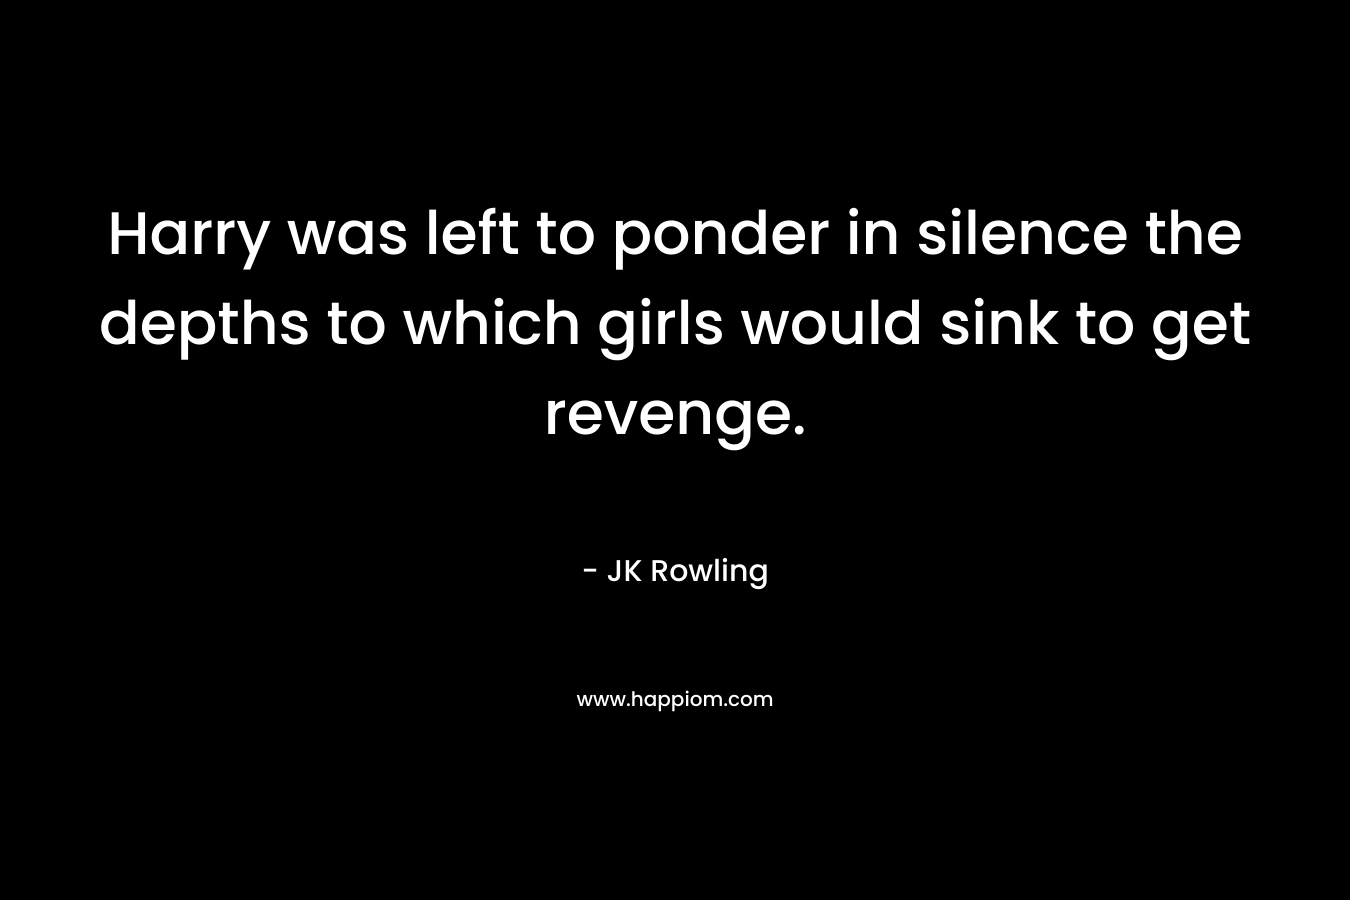 Harry was left to ponder in silence the depths to which girls would sink to get revenge. – JK Rowling